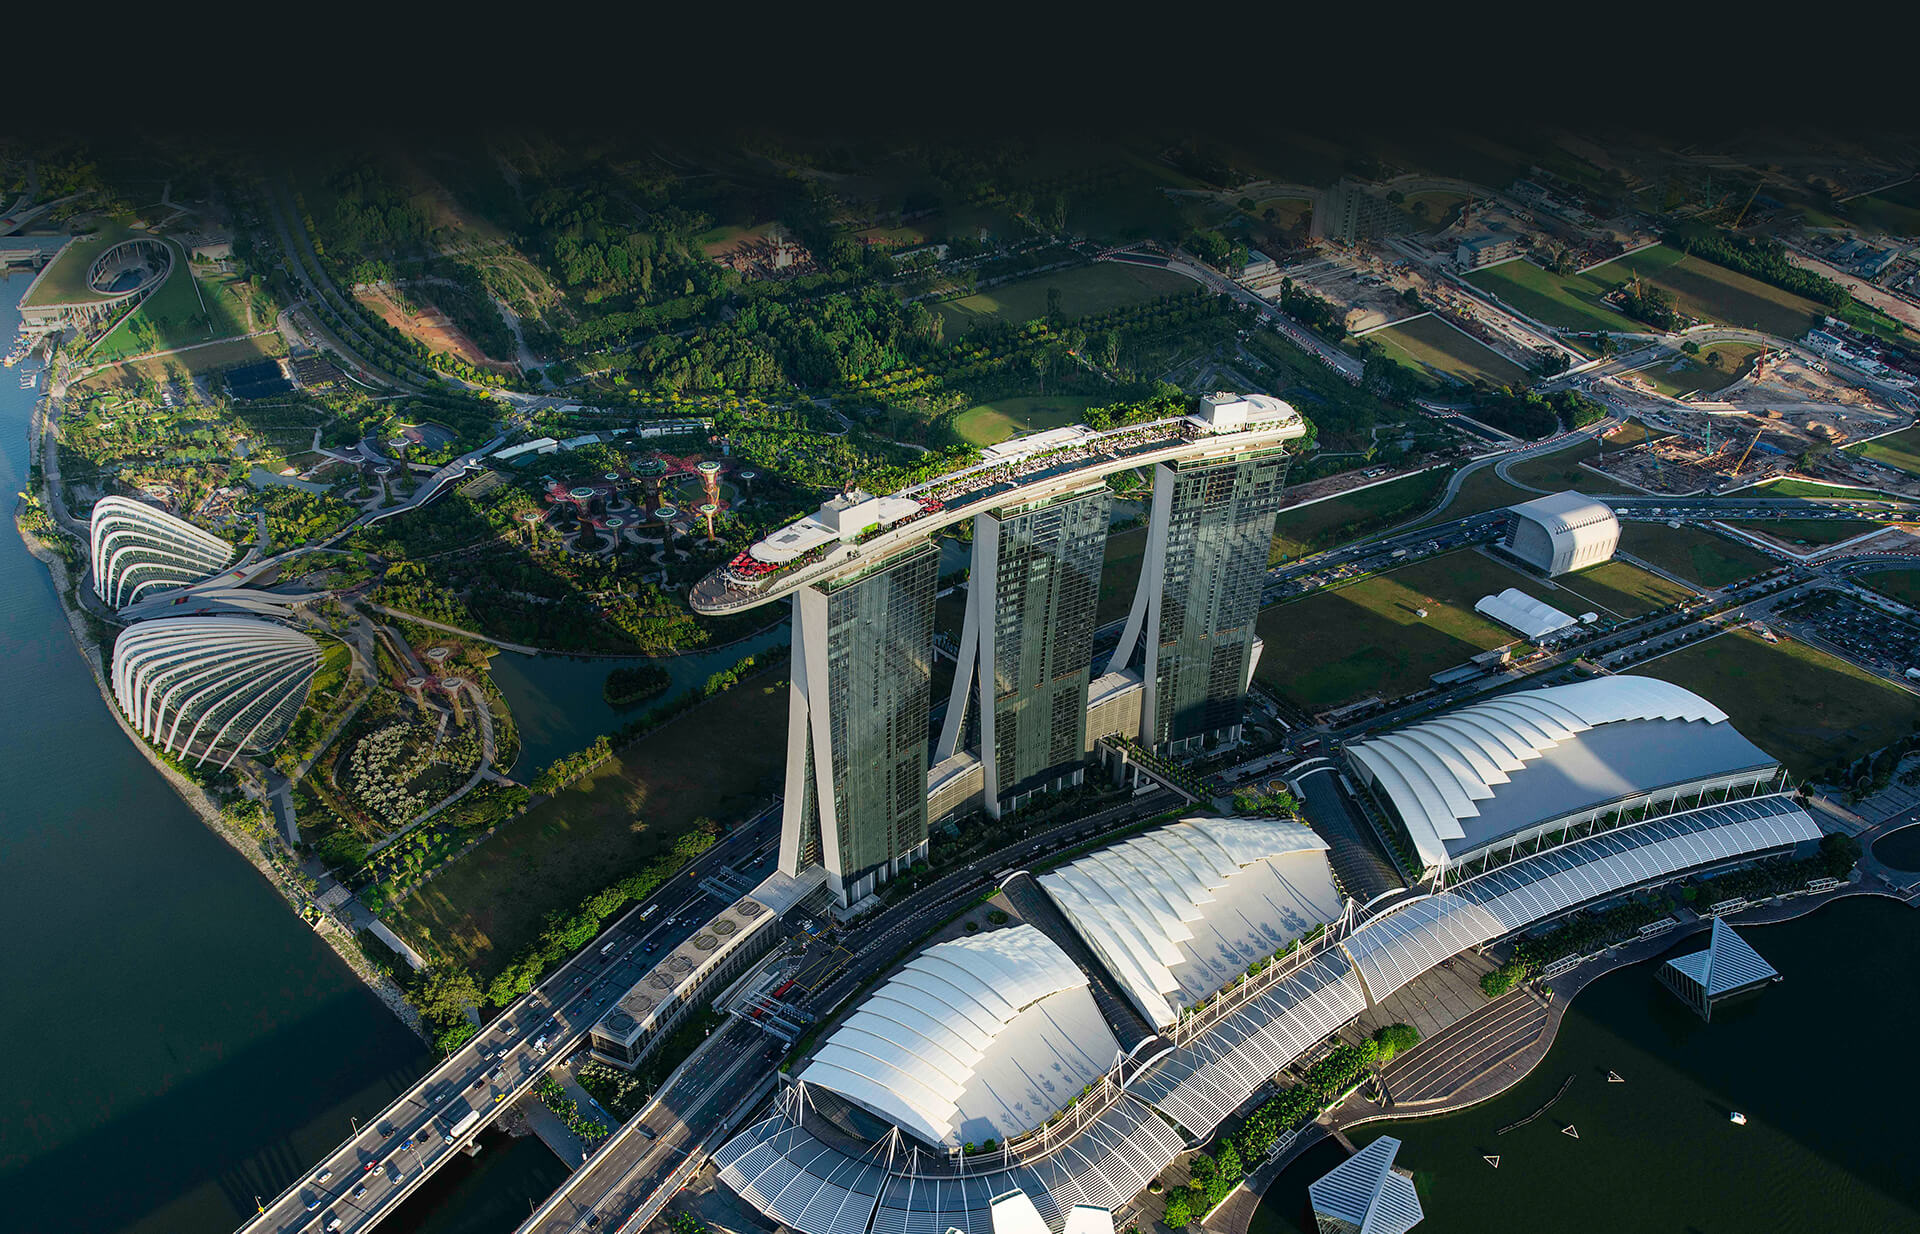 Directions to Marina Bay Sands